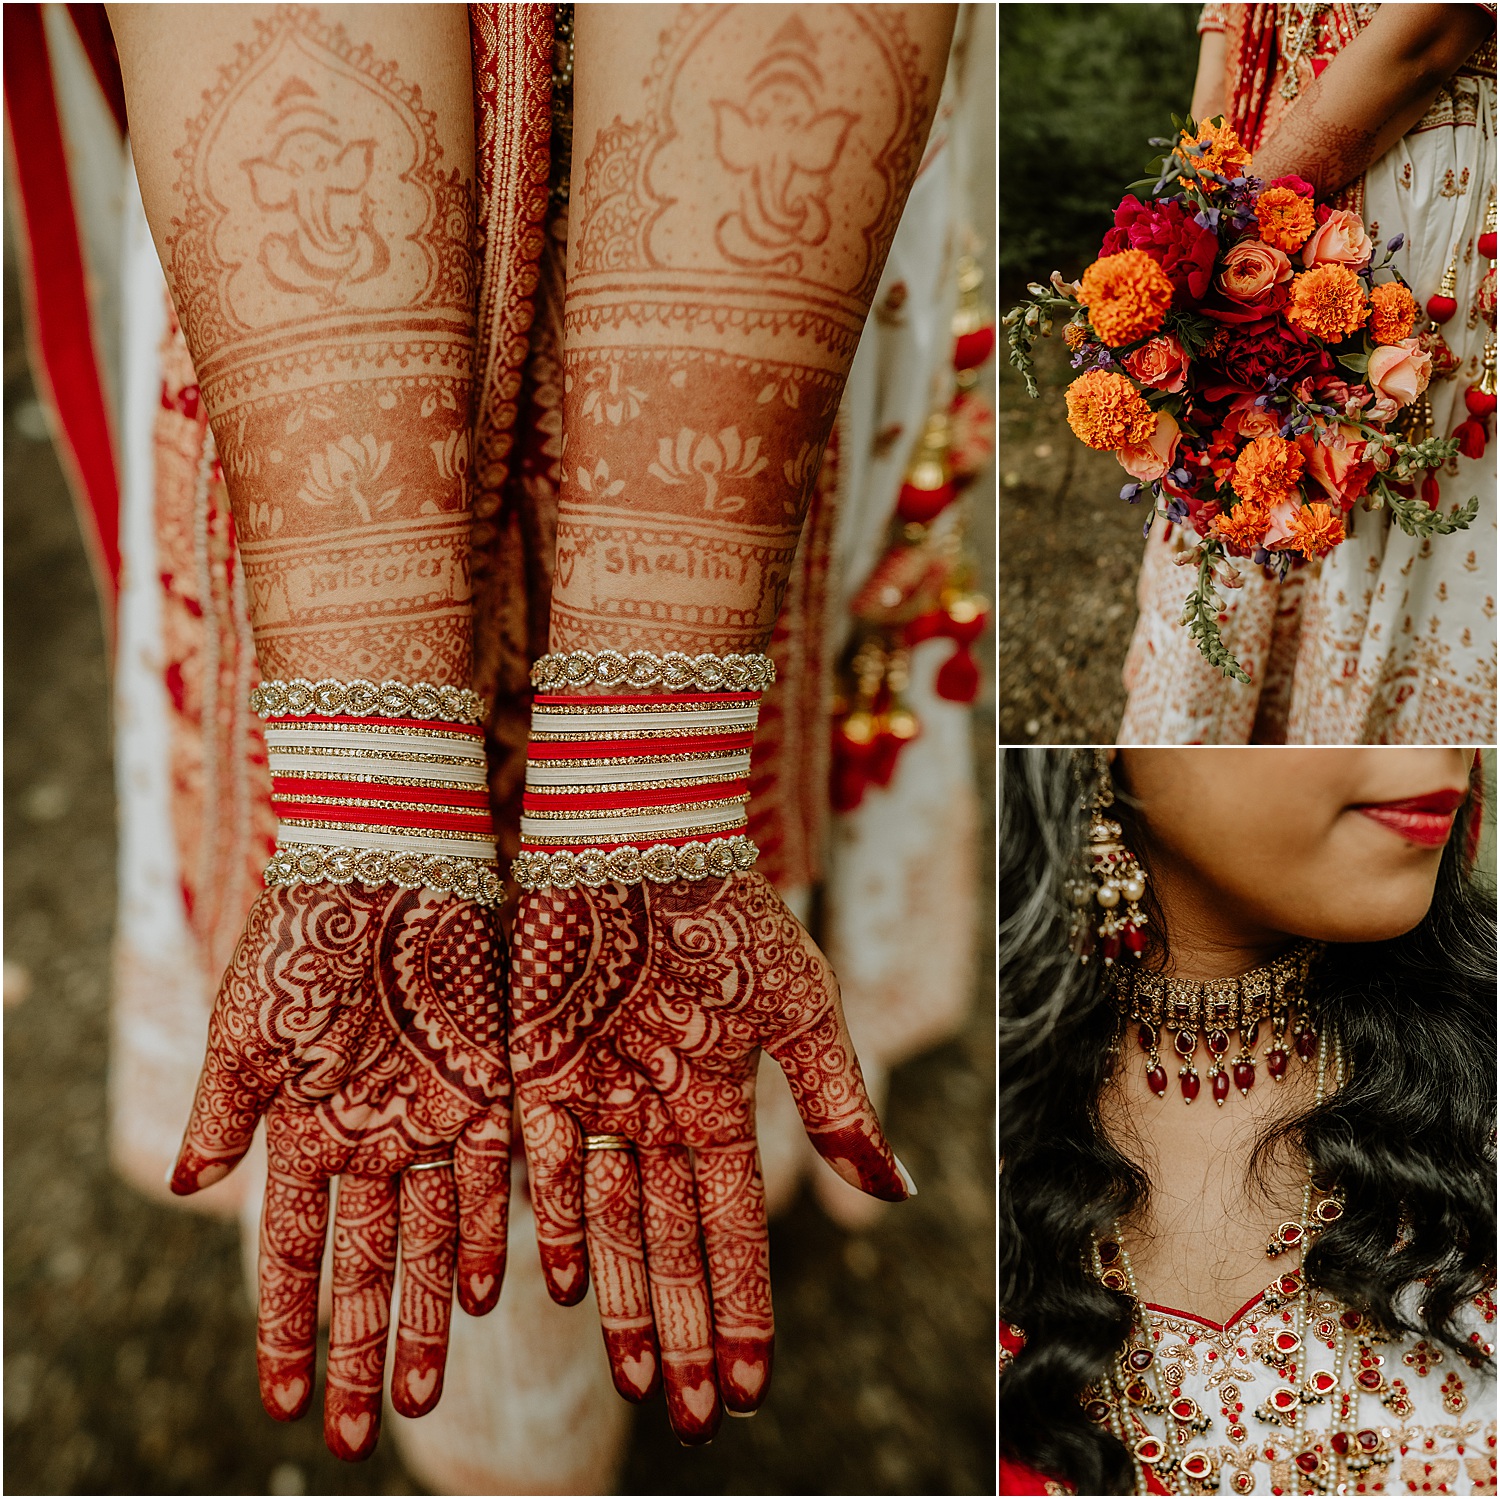 Stunning bridal tattoo and accessories for wedding at Caswell Farm